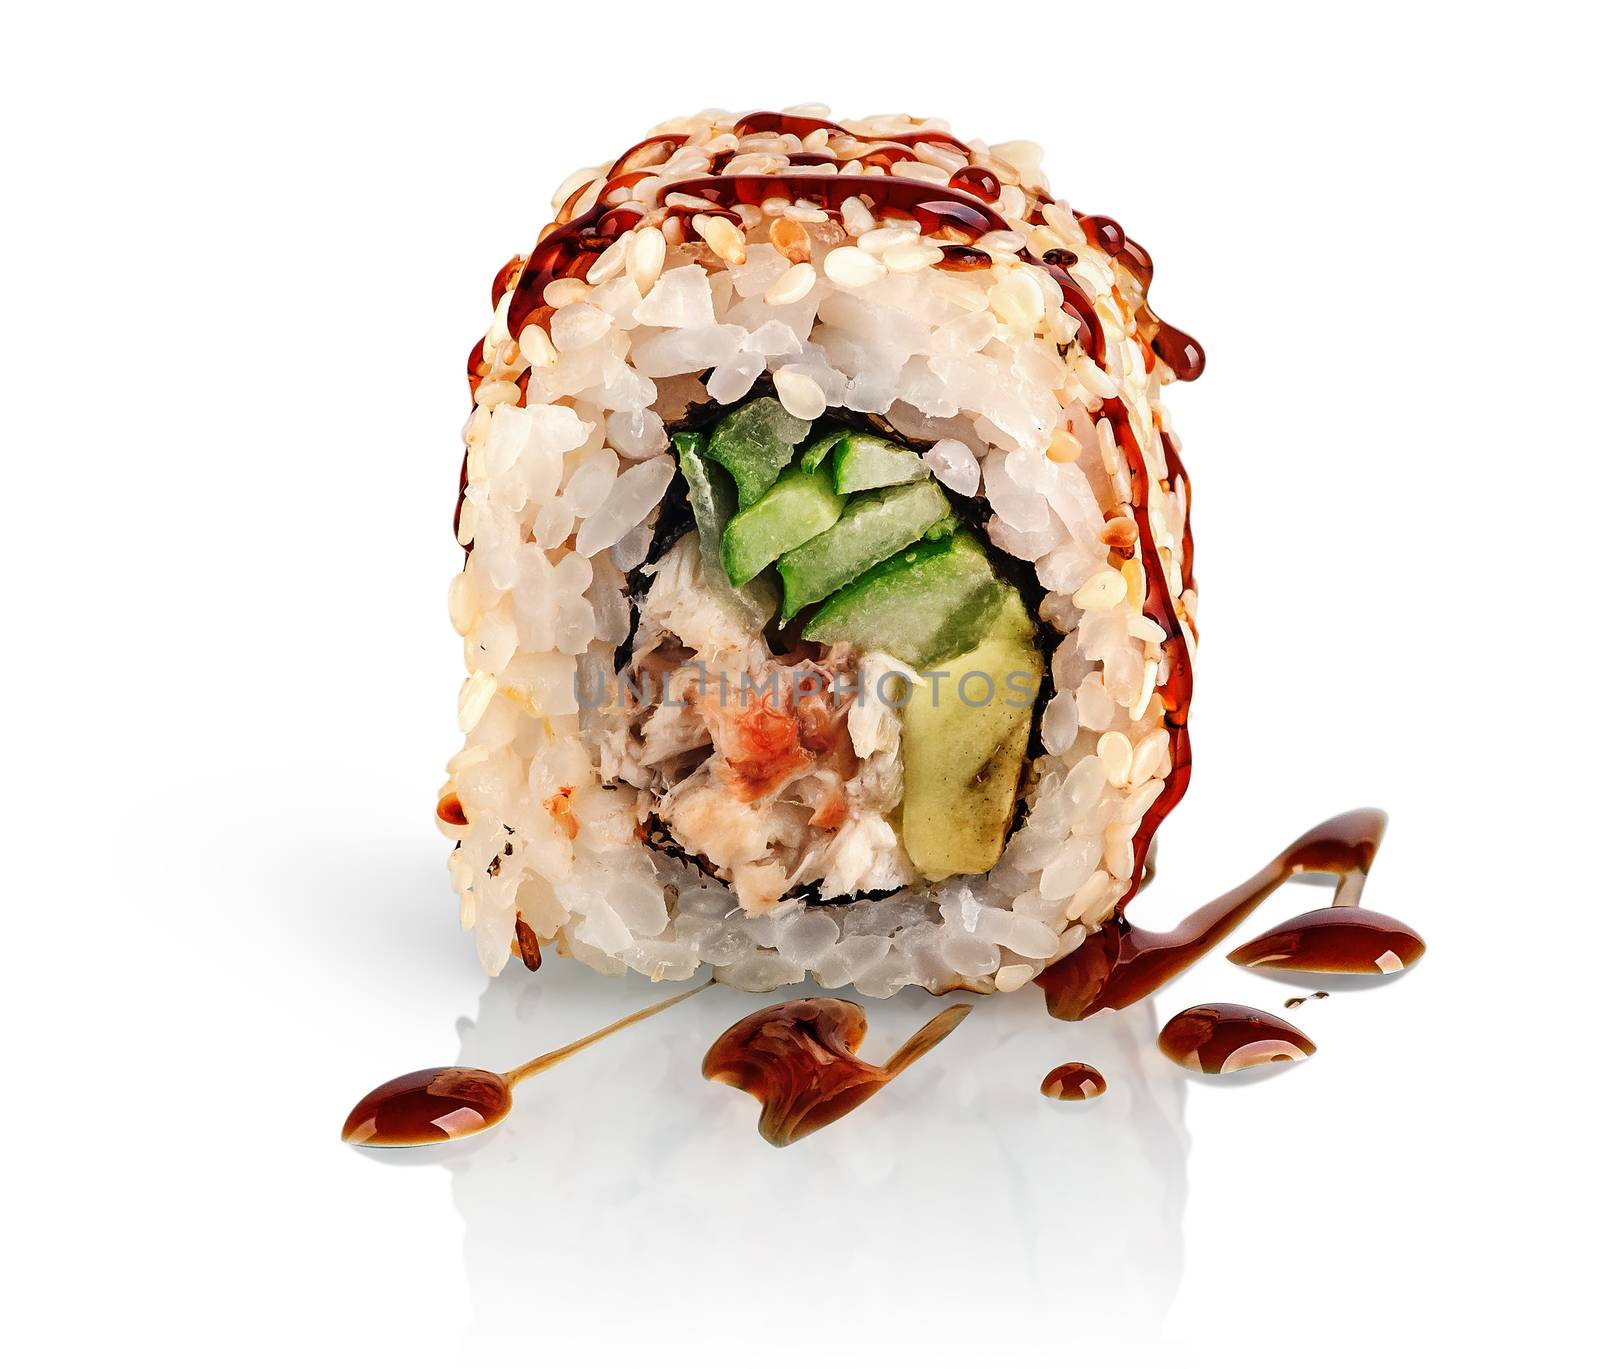 In front sushi roll california food isolated on white background. Sushi roll with eel, vegetables and unagi sauce. Reflection.